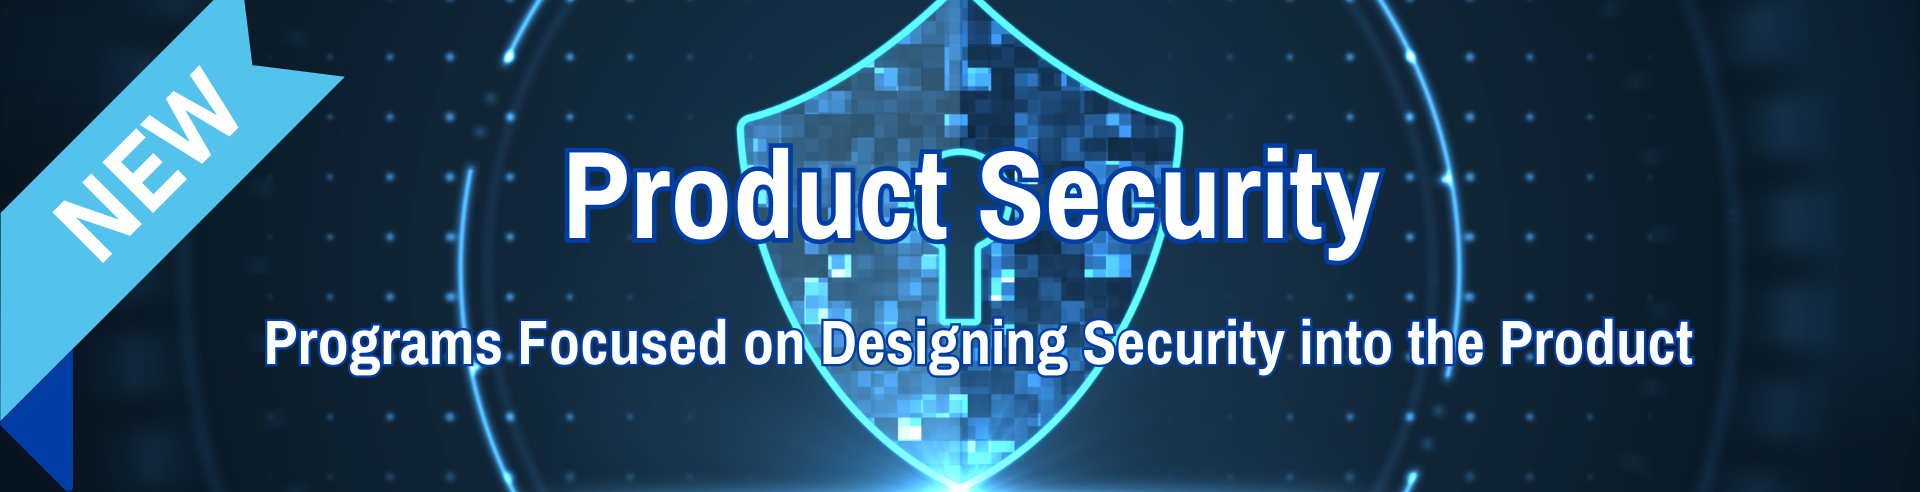 Product Security